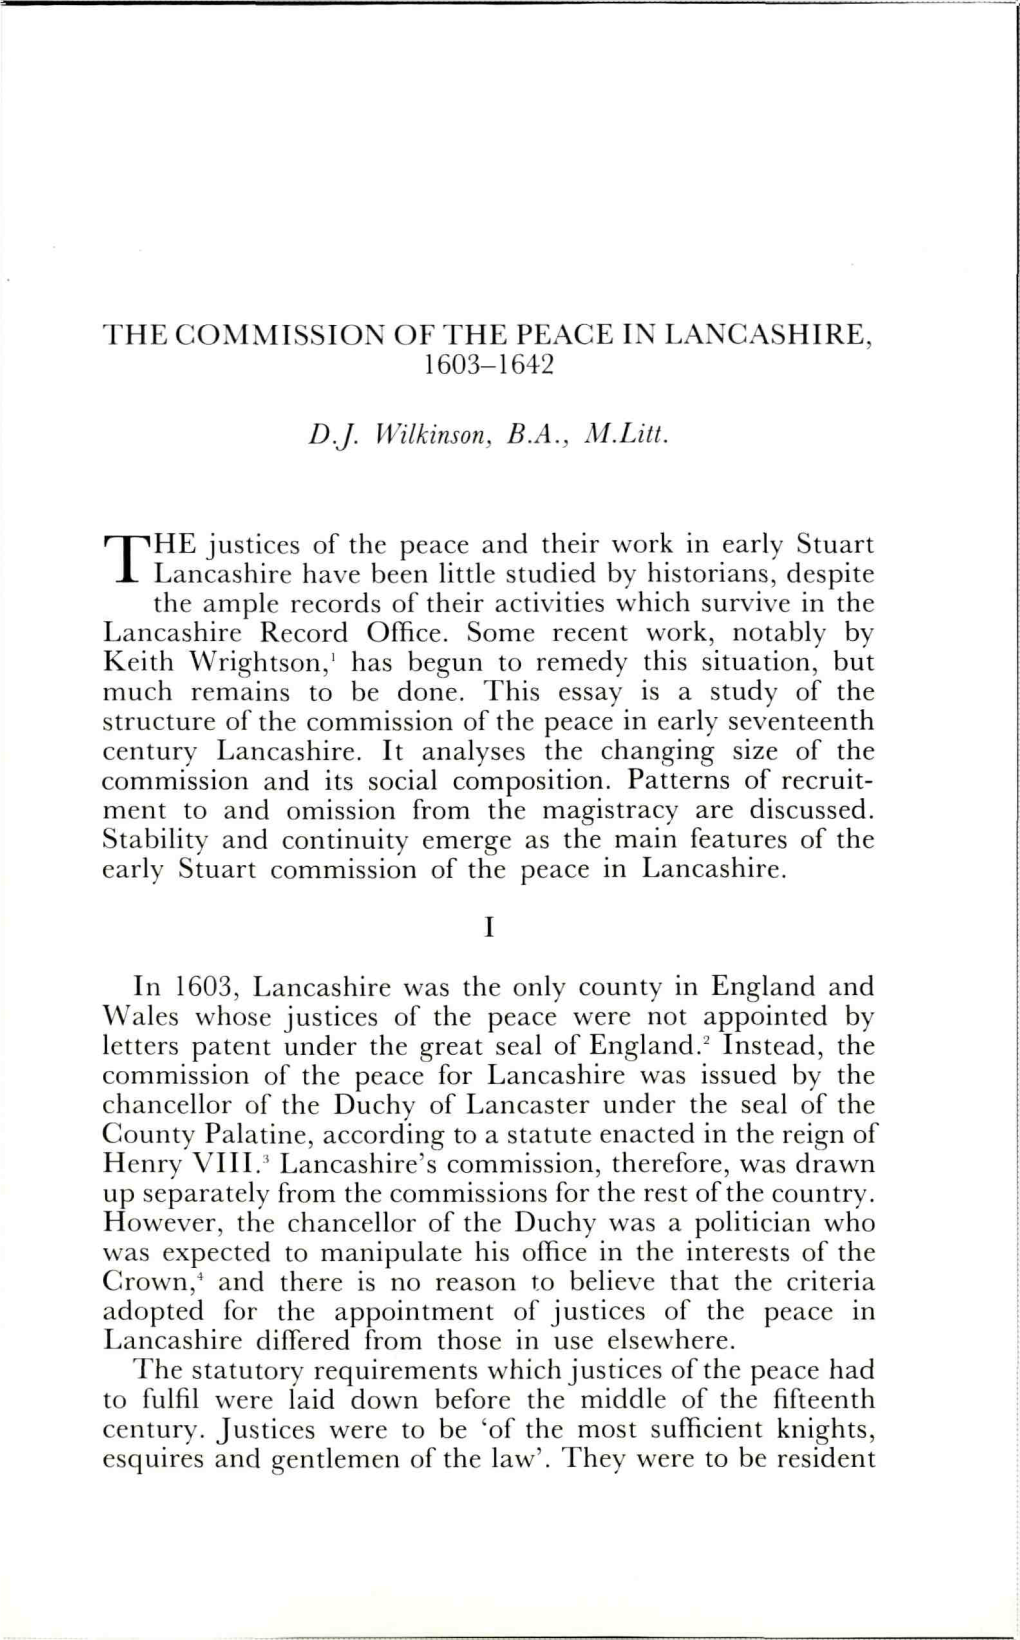 THE Justices of the Peace and Their Work in Early Stuart